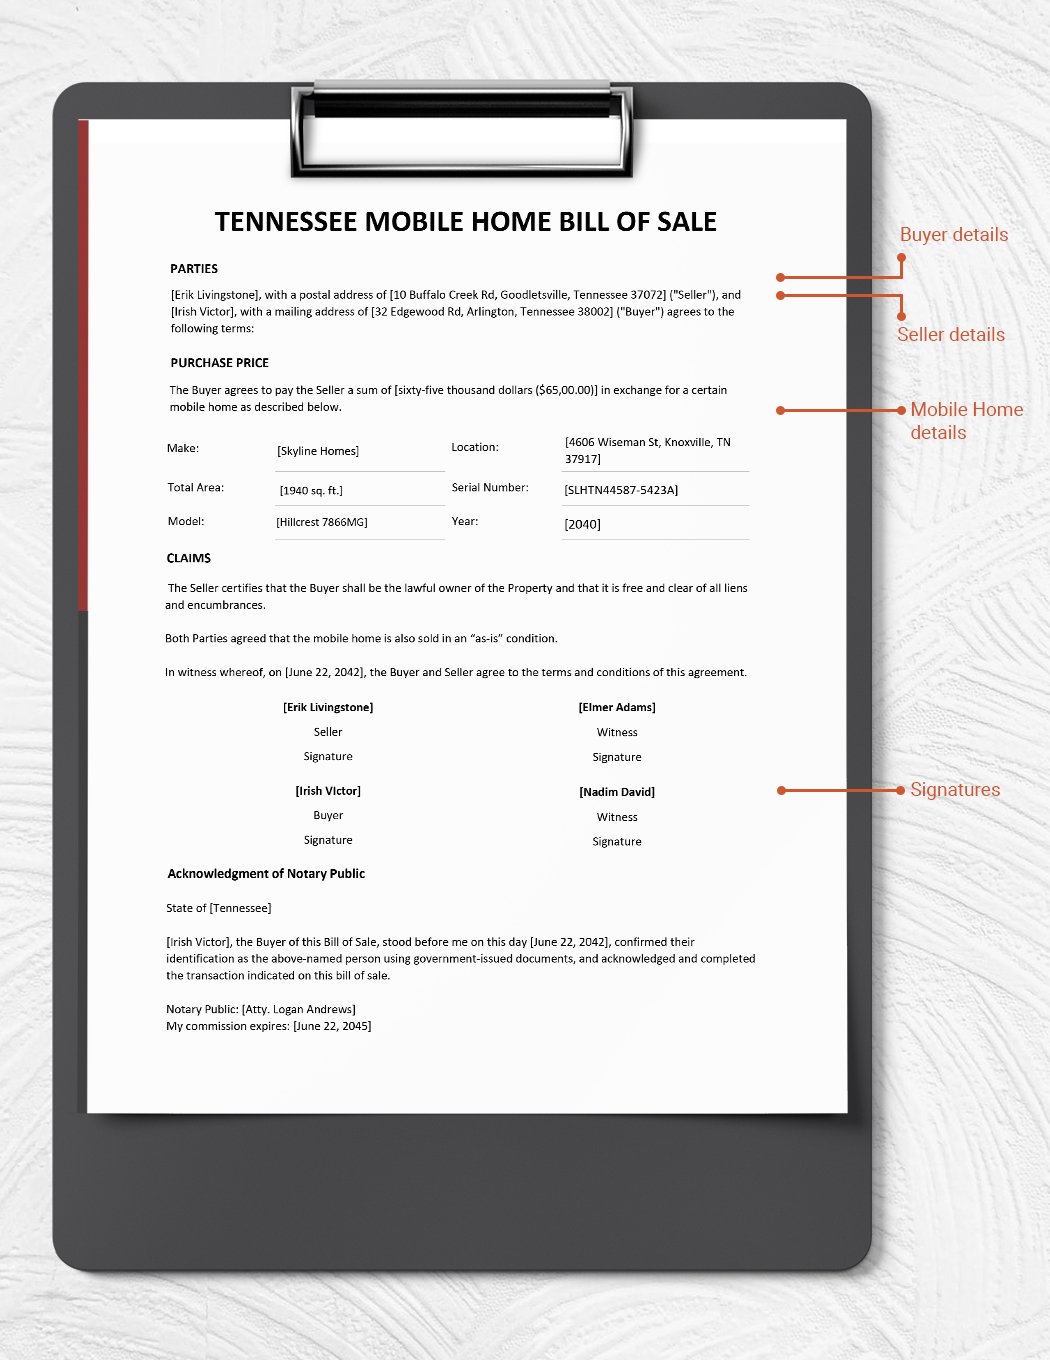 Tennessee Mobile Home Bill of Sale Template